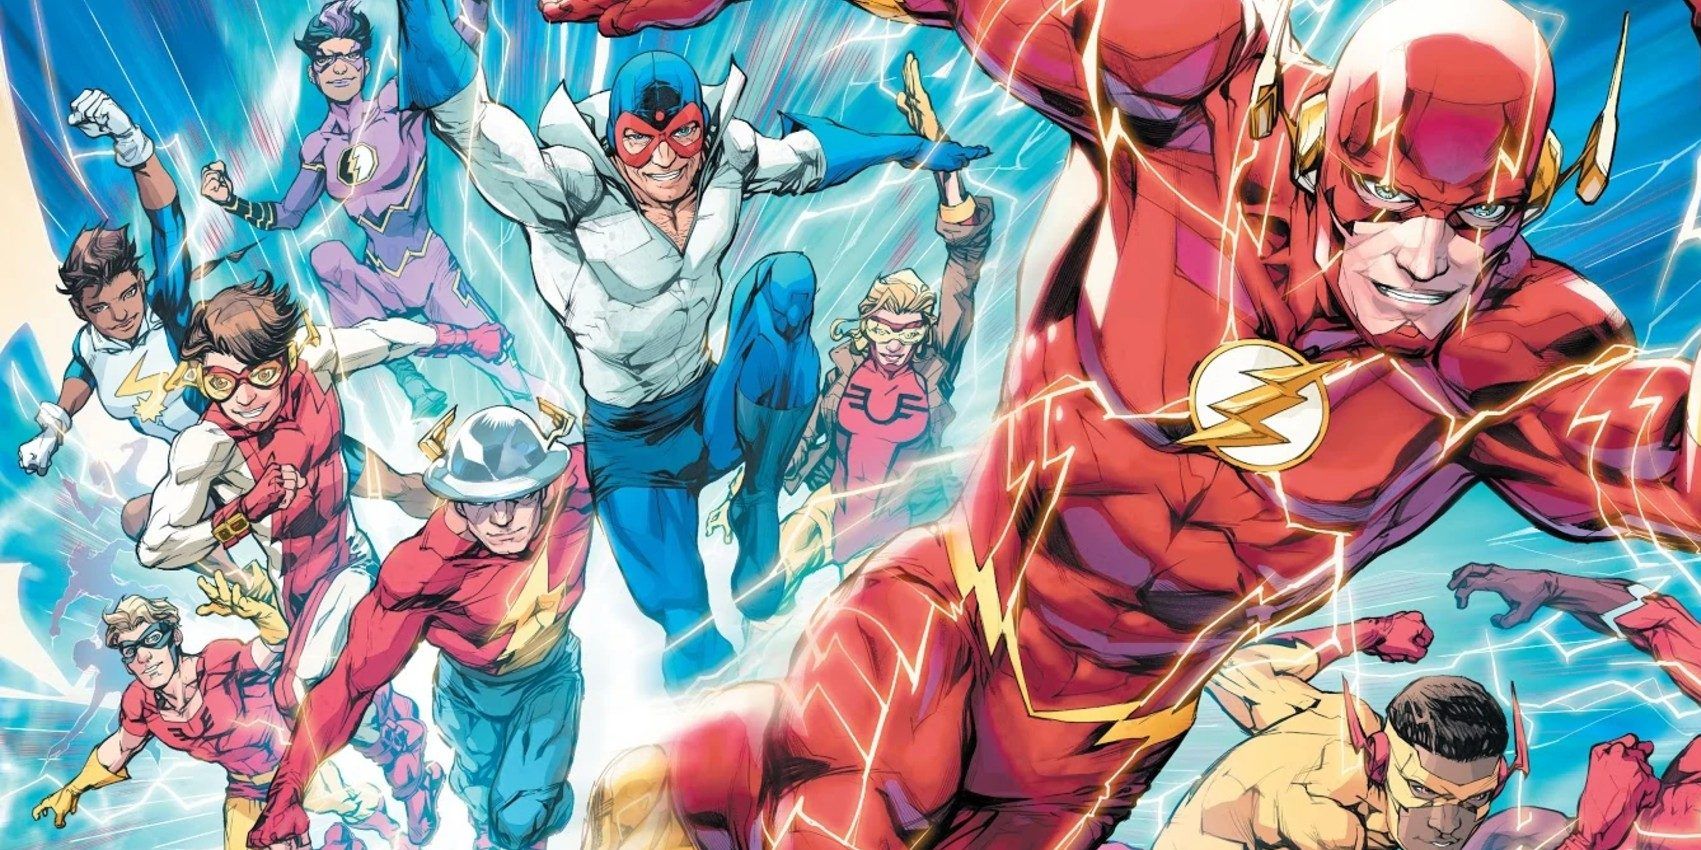 a collage of The Flash Family from DC Comics, including Barry Allen, Jay Garrick, Wally West, and many more